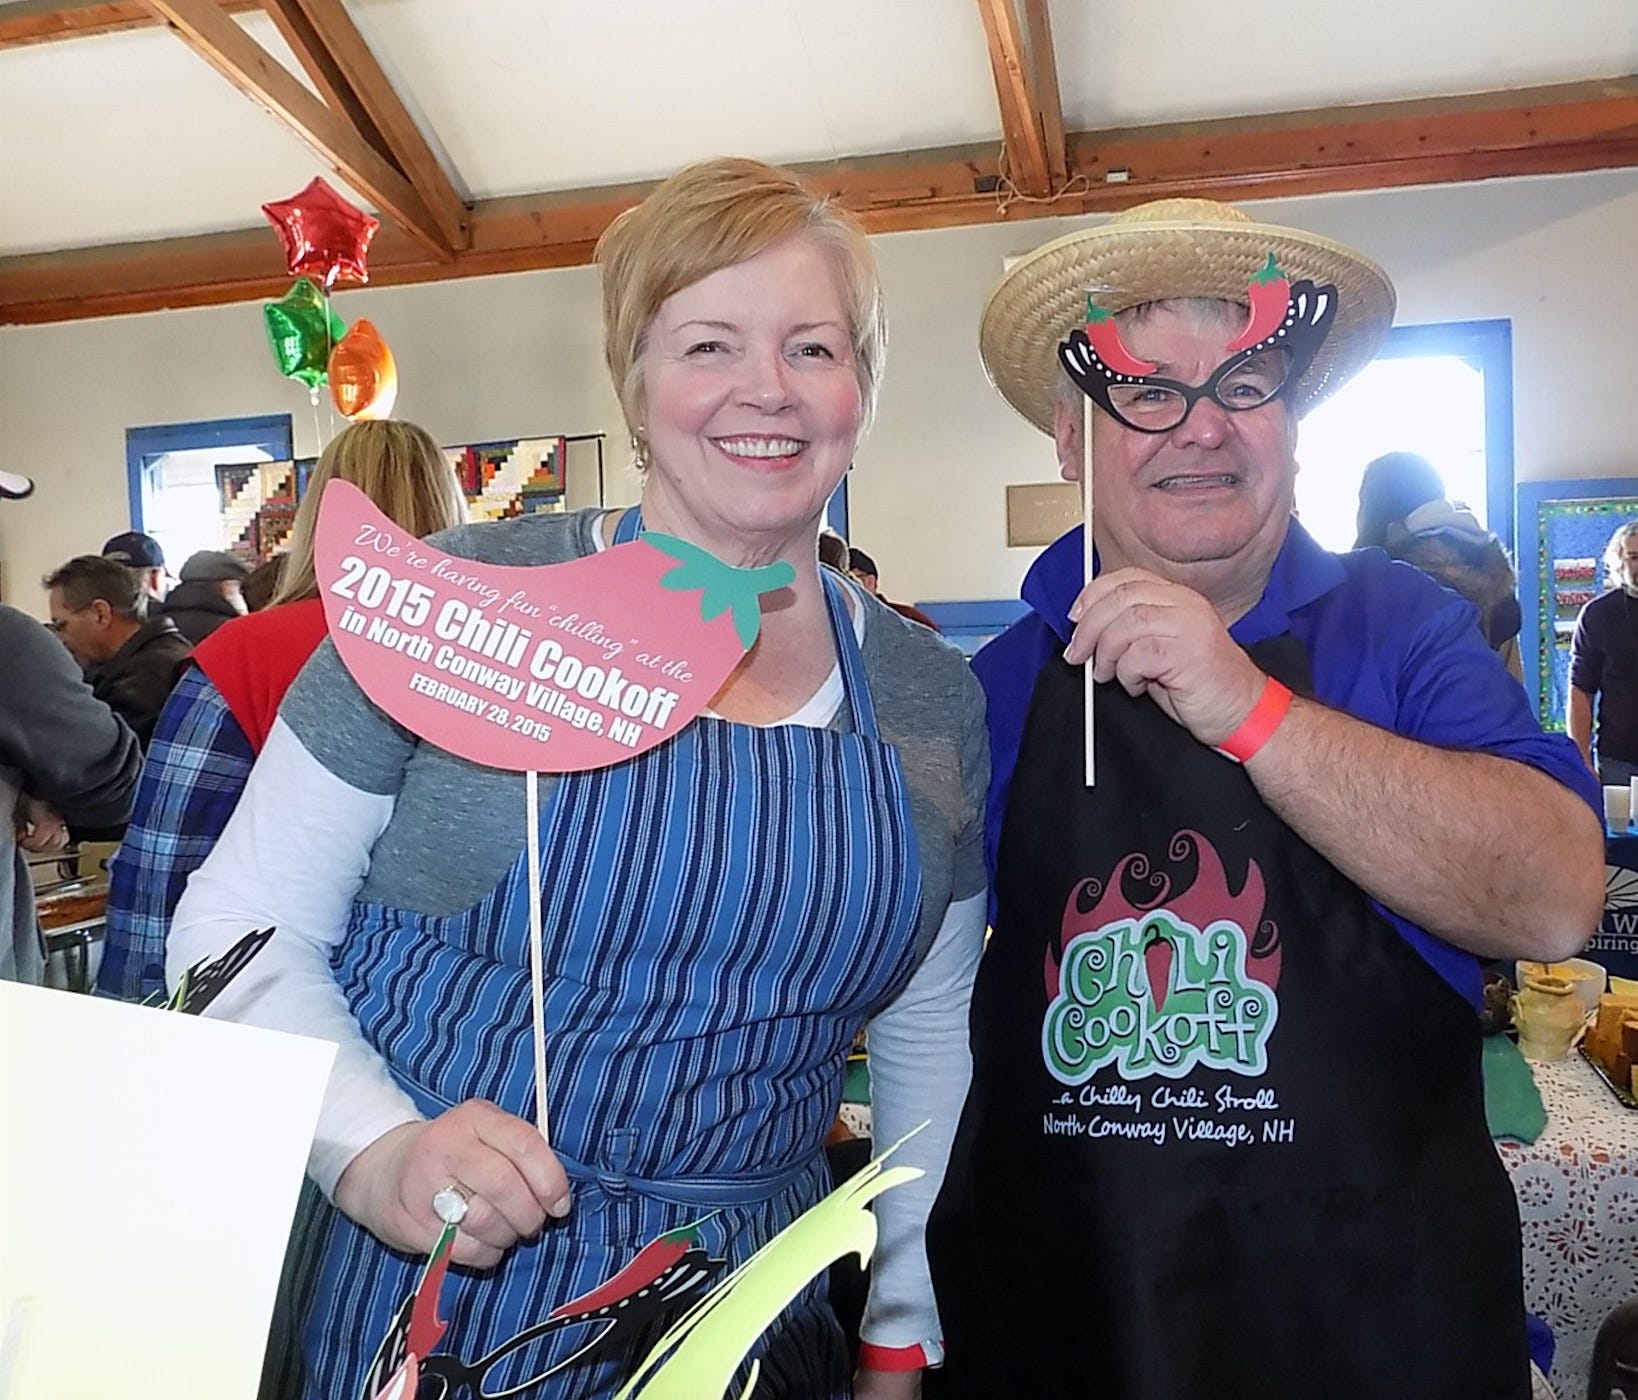 New Hampshire's 14th annual Chili Cookoff will take place at the North Conway Community Center and Gibson Center for Senior Services on April 8. Professional and amateur chefs compete for the best chili with samples for attendees and area activities,